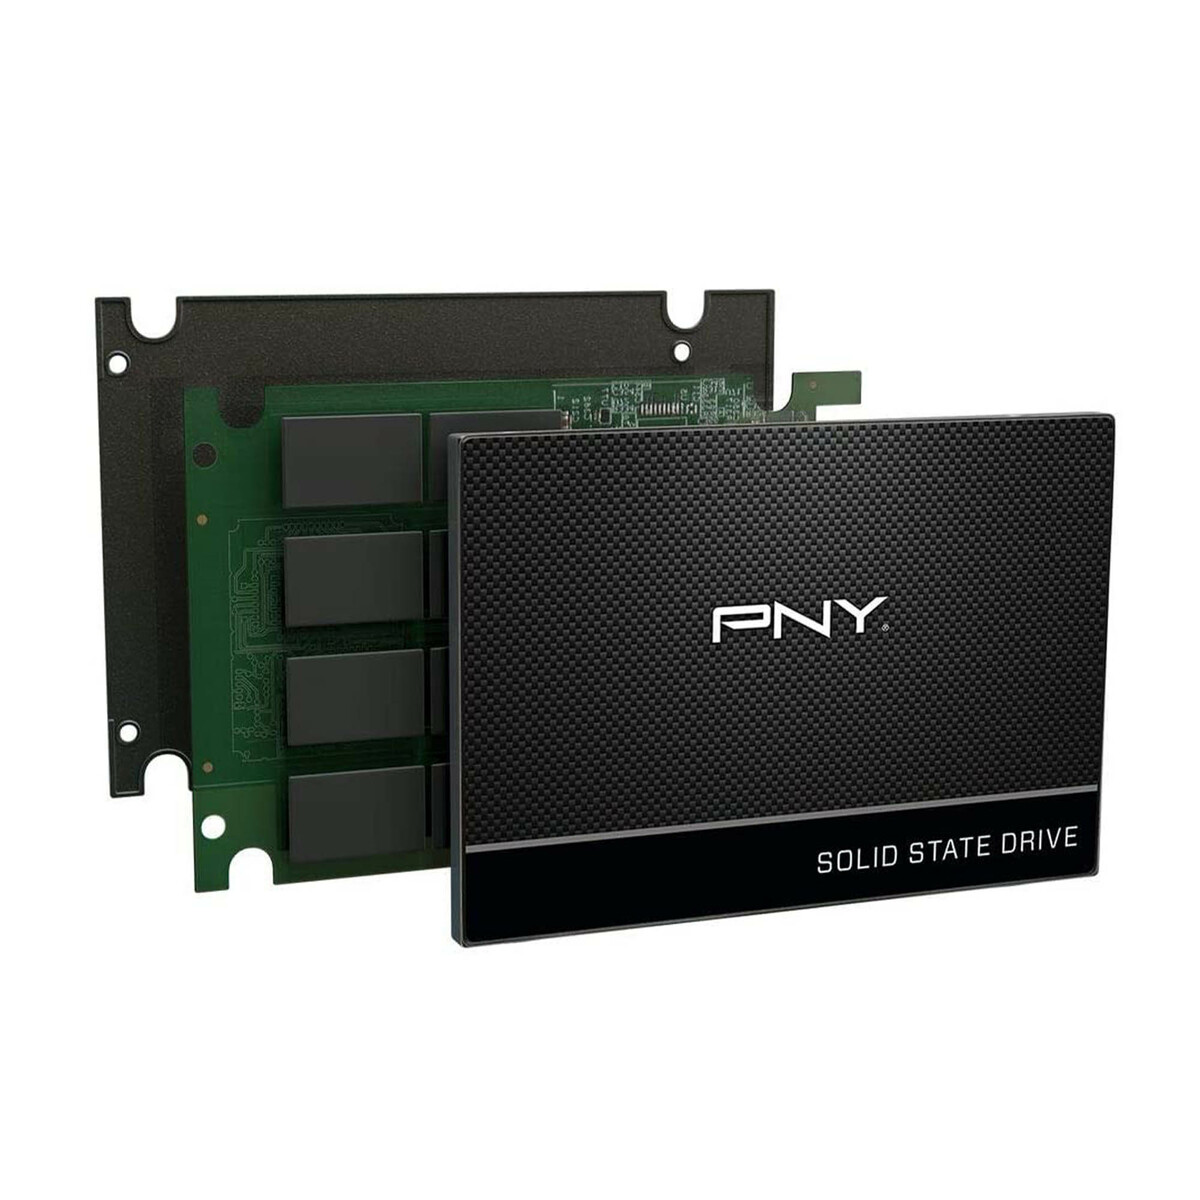 PNY Internal SSD CS900-120PB 120GB Online at Best Price | Solid State